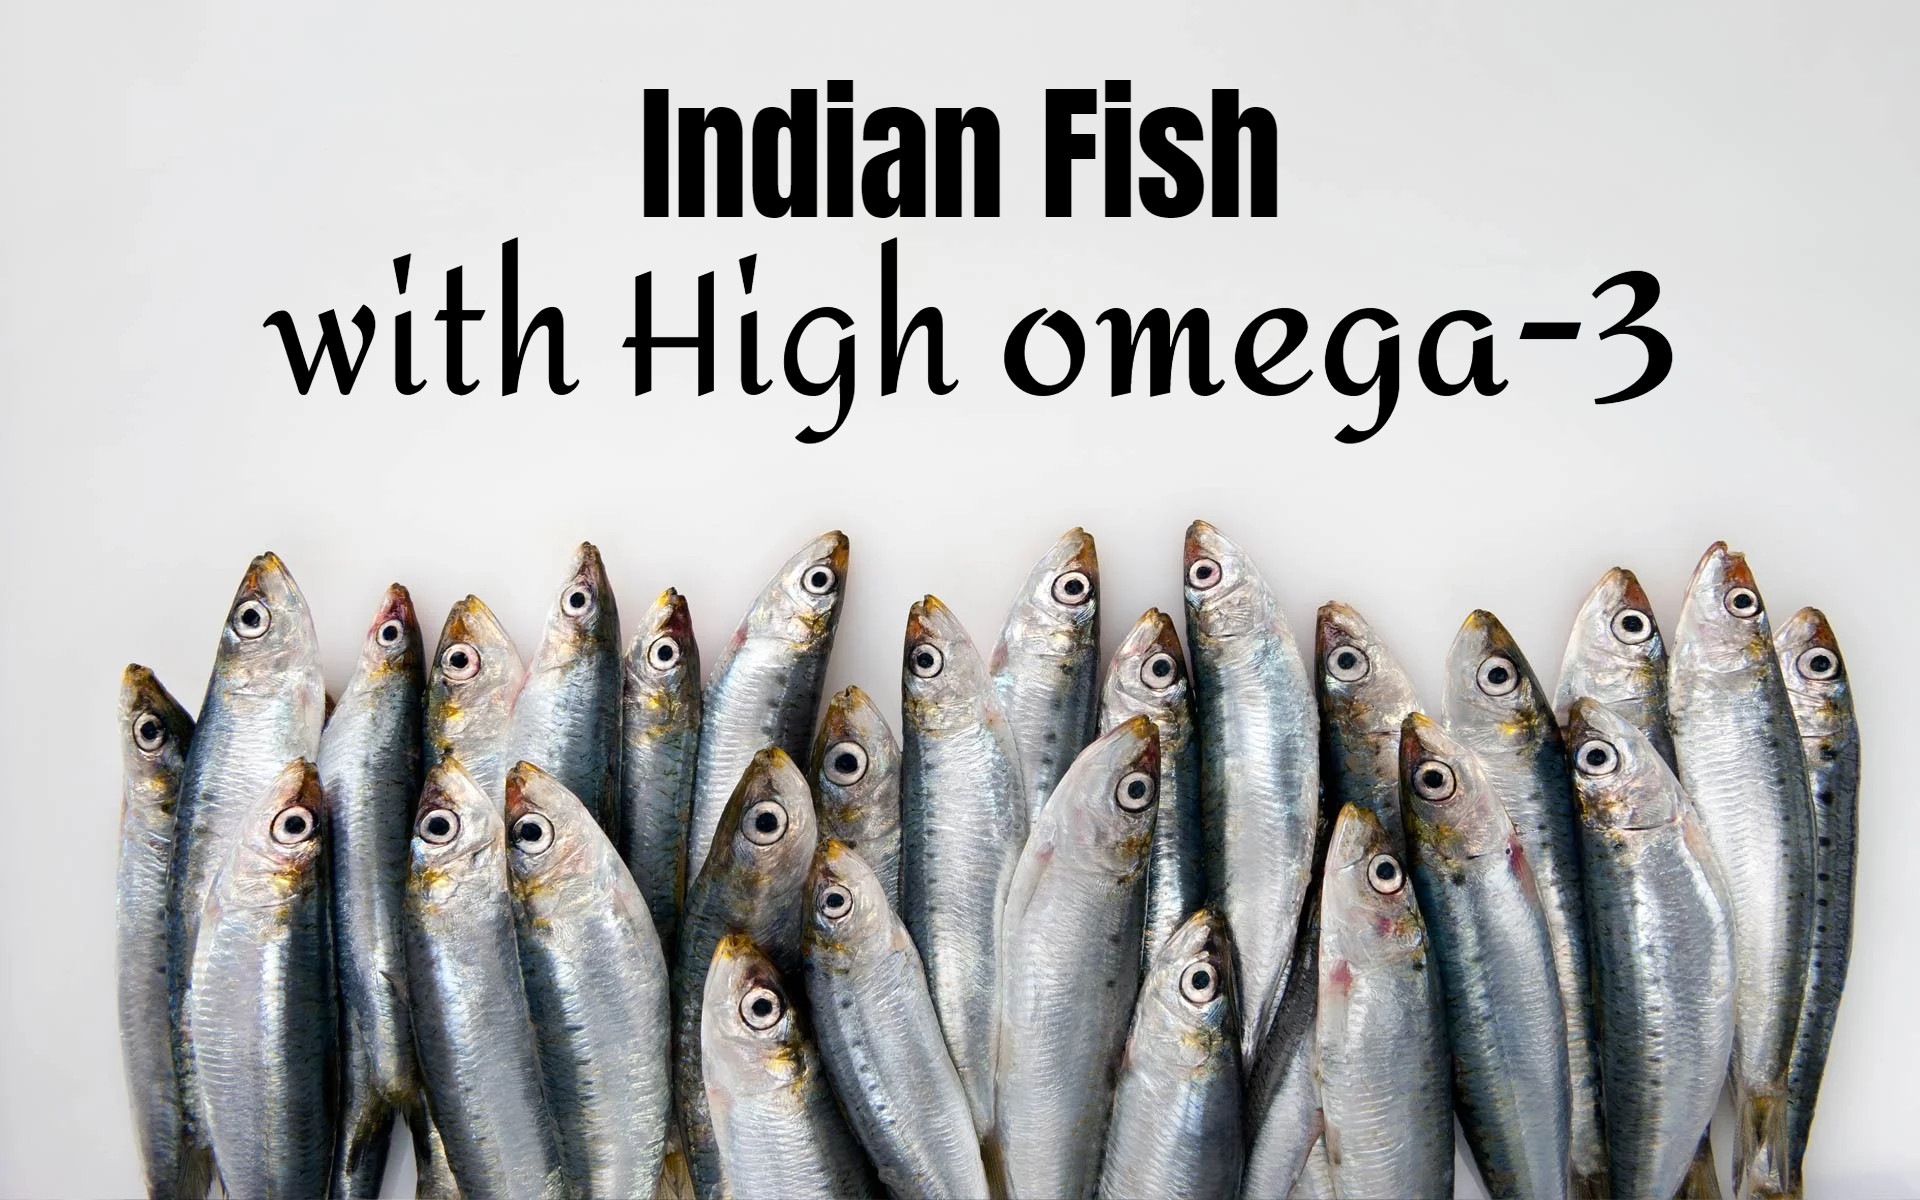 Indian Fish with High omega 3